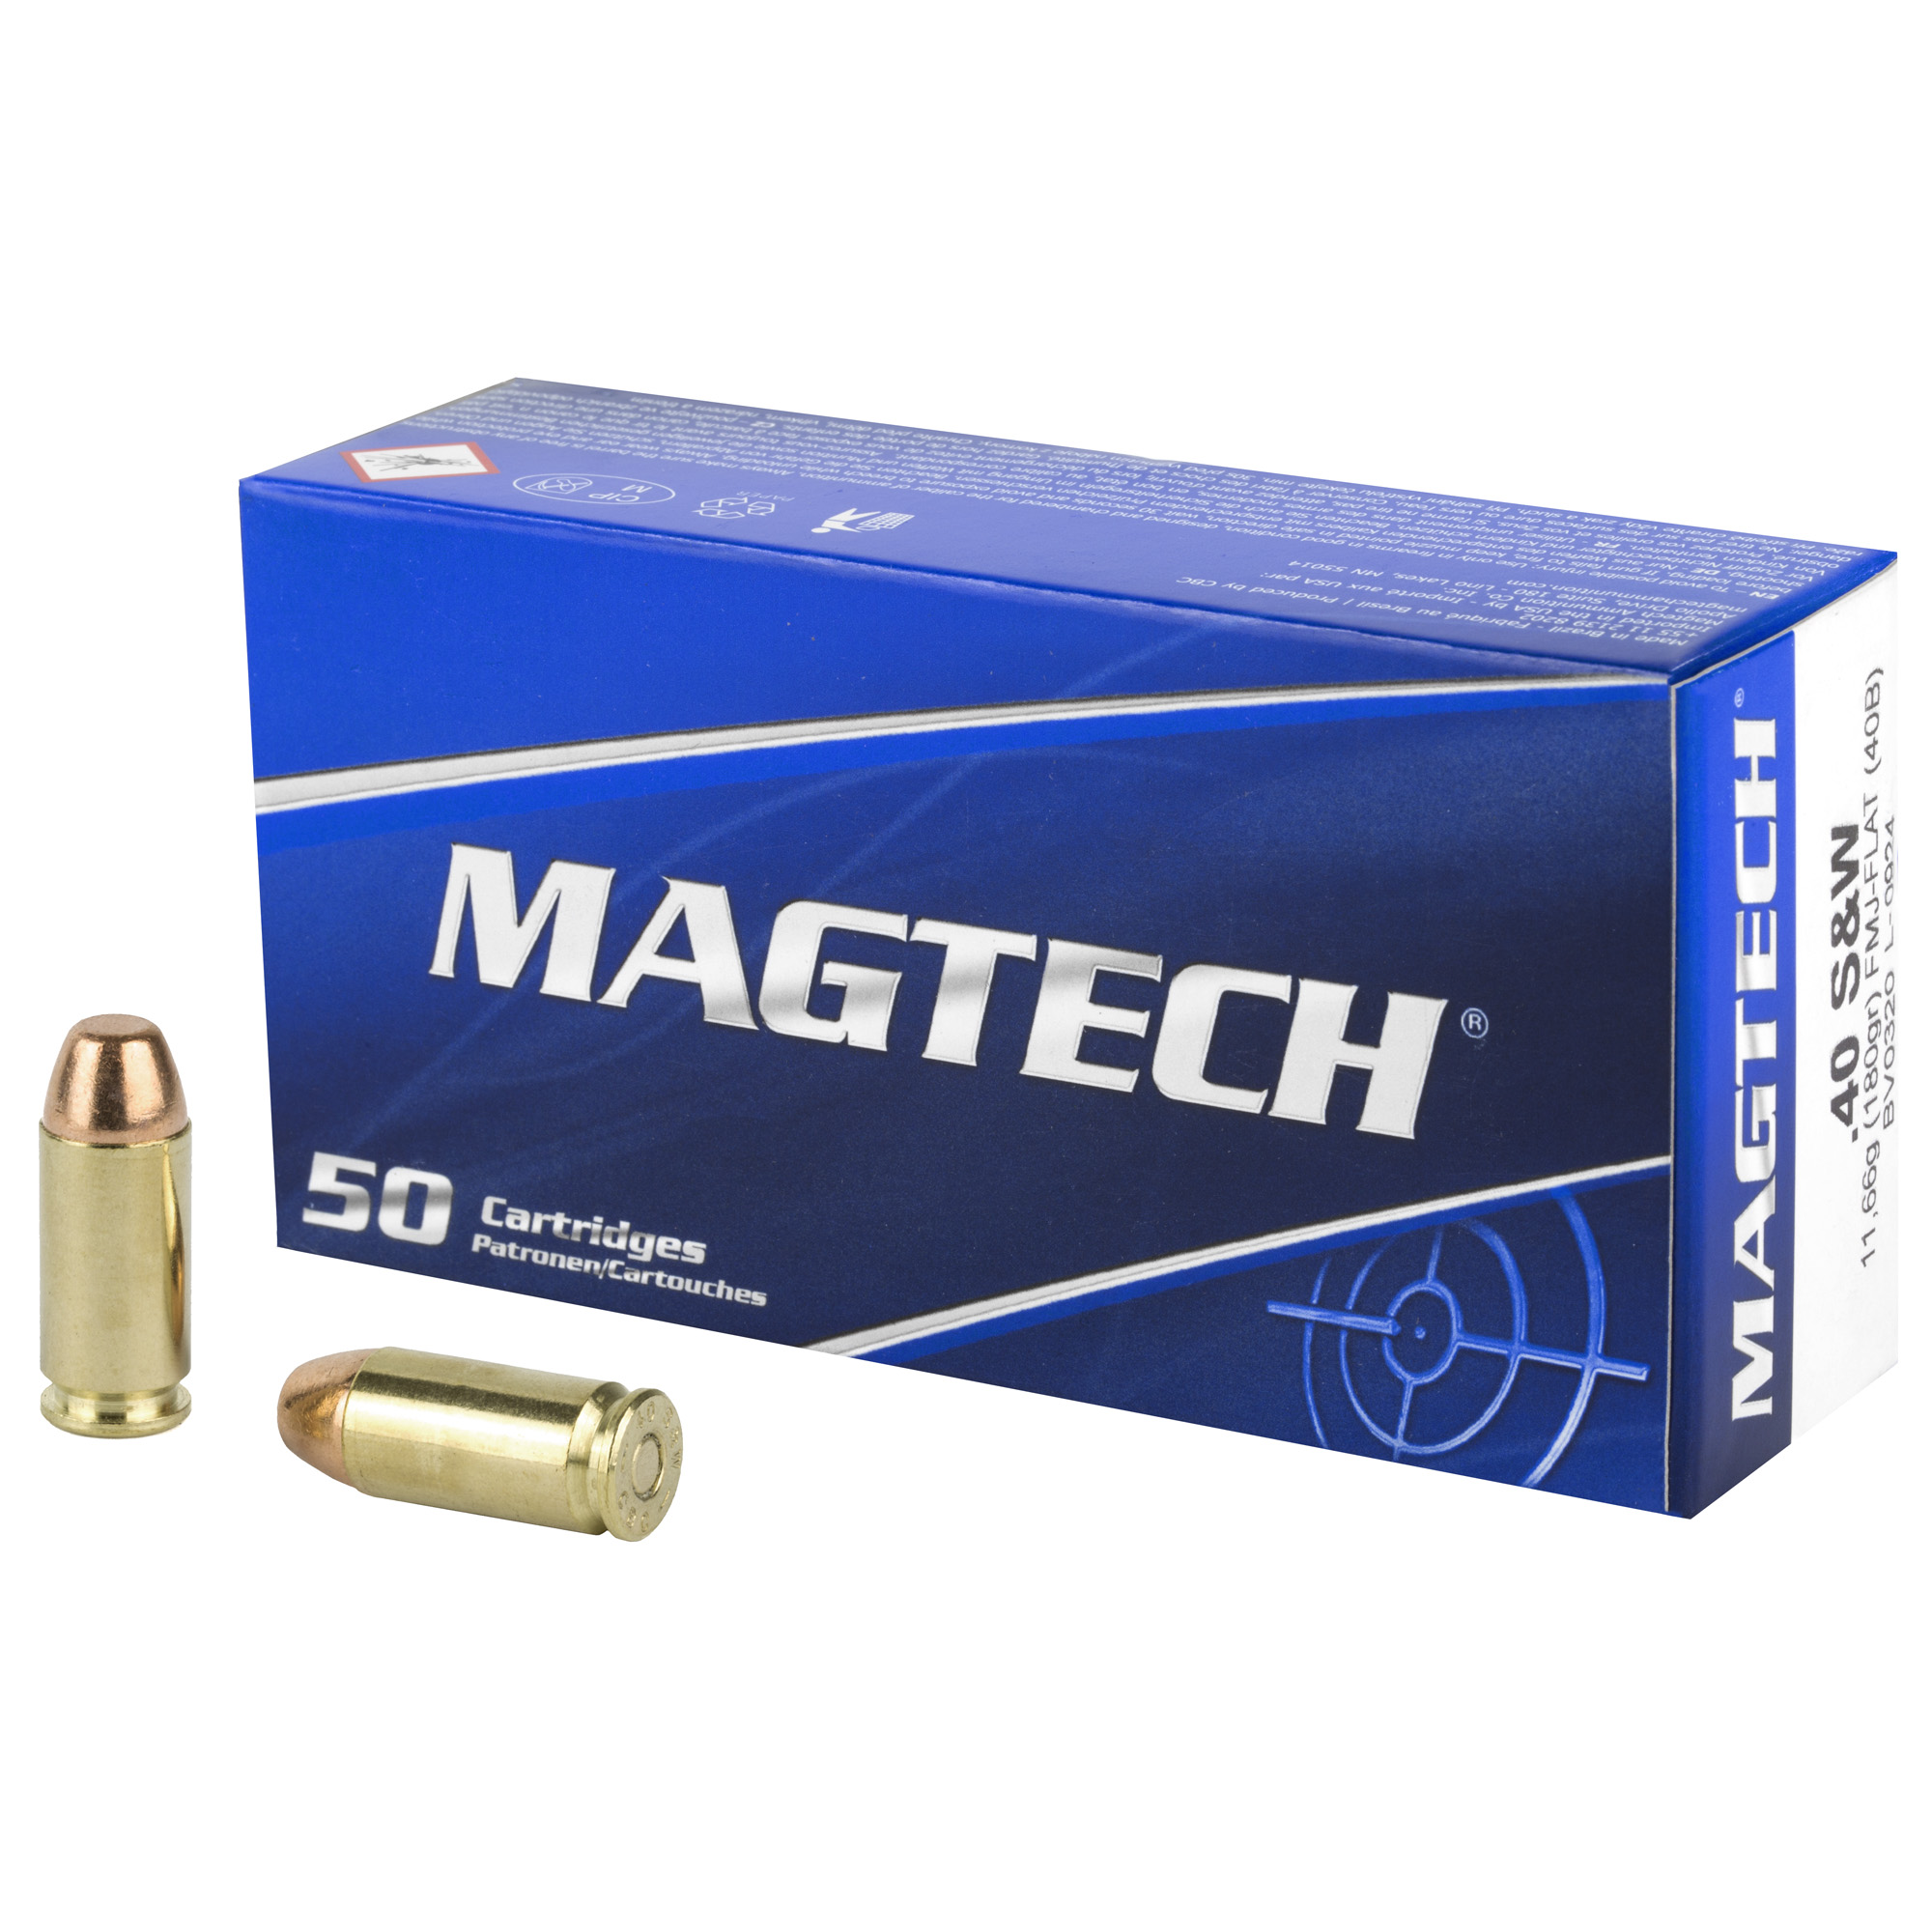 Magtech, Sport Shooting, 40S&W, 180 Grain FMJ, Flat Nose, Full Metal Case, 50 Round Box,  Case Pack 20-Boxes (1000Rds.), 40B,